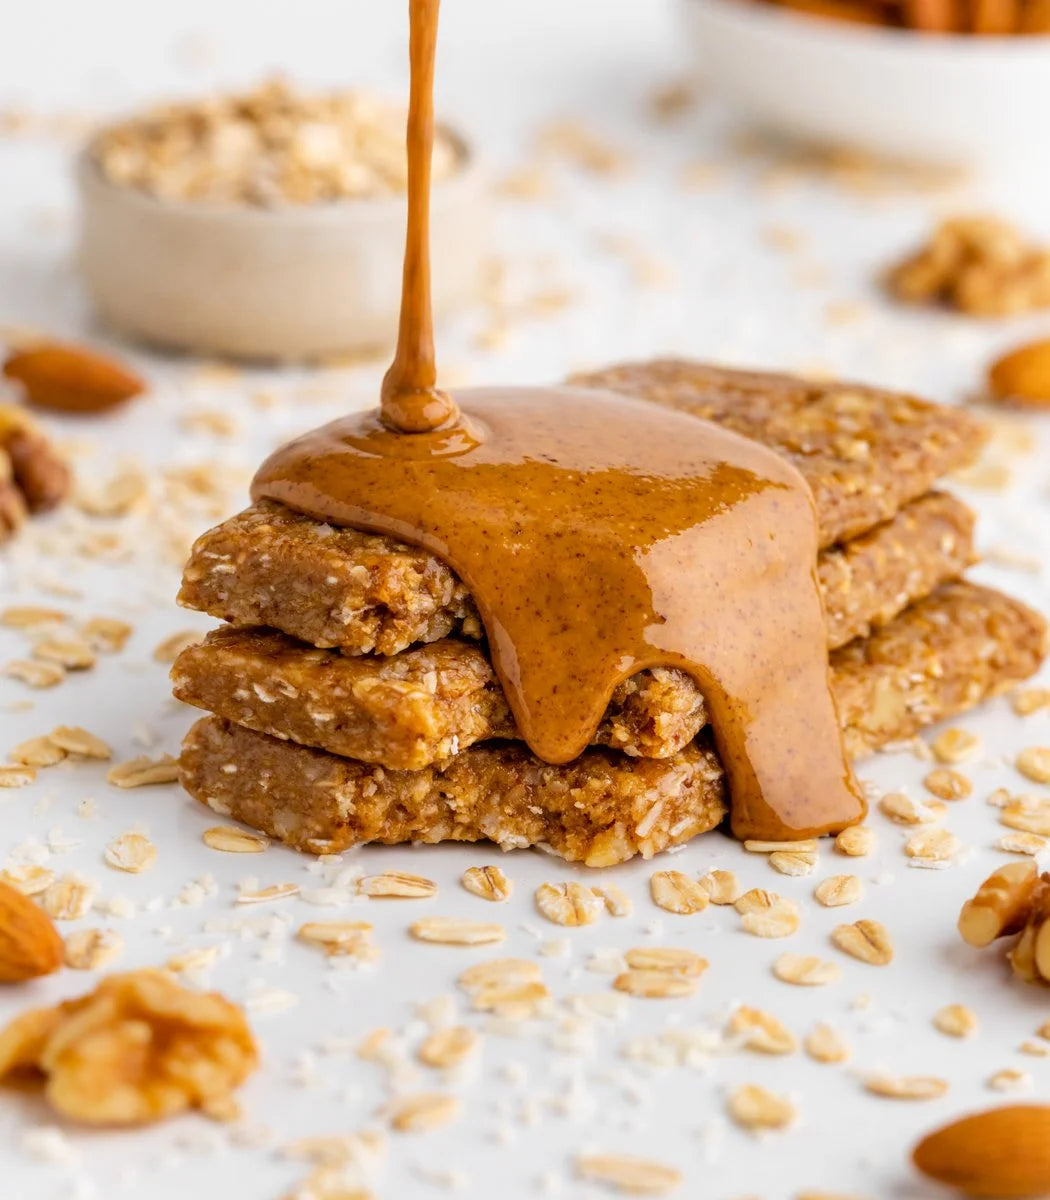 Protein bars with natural ingredients